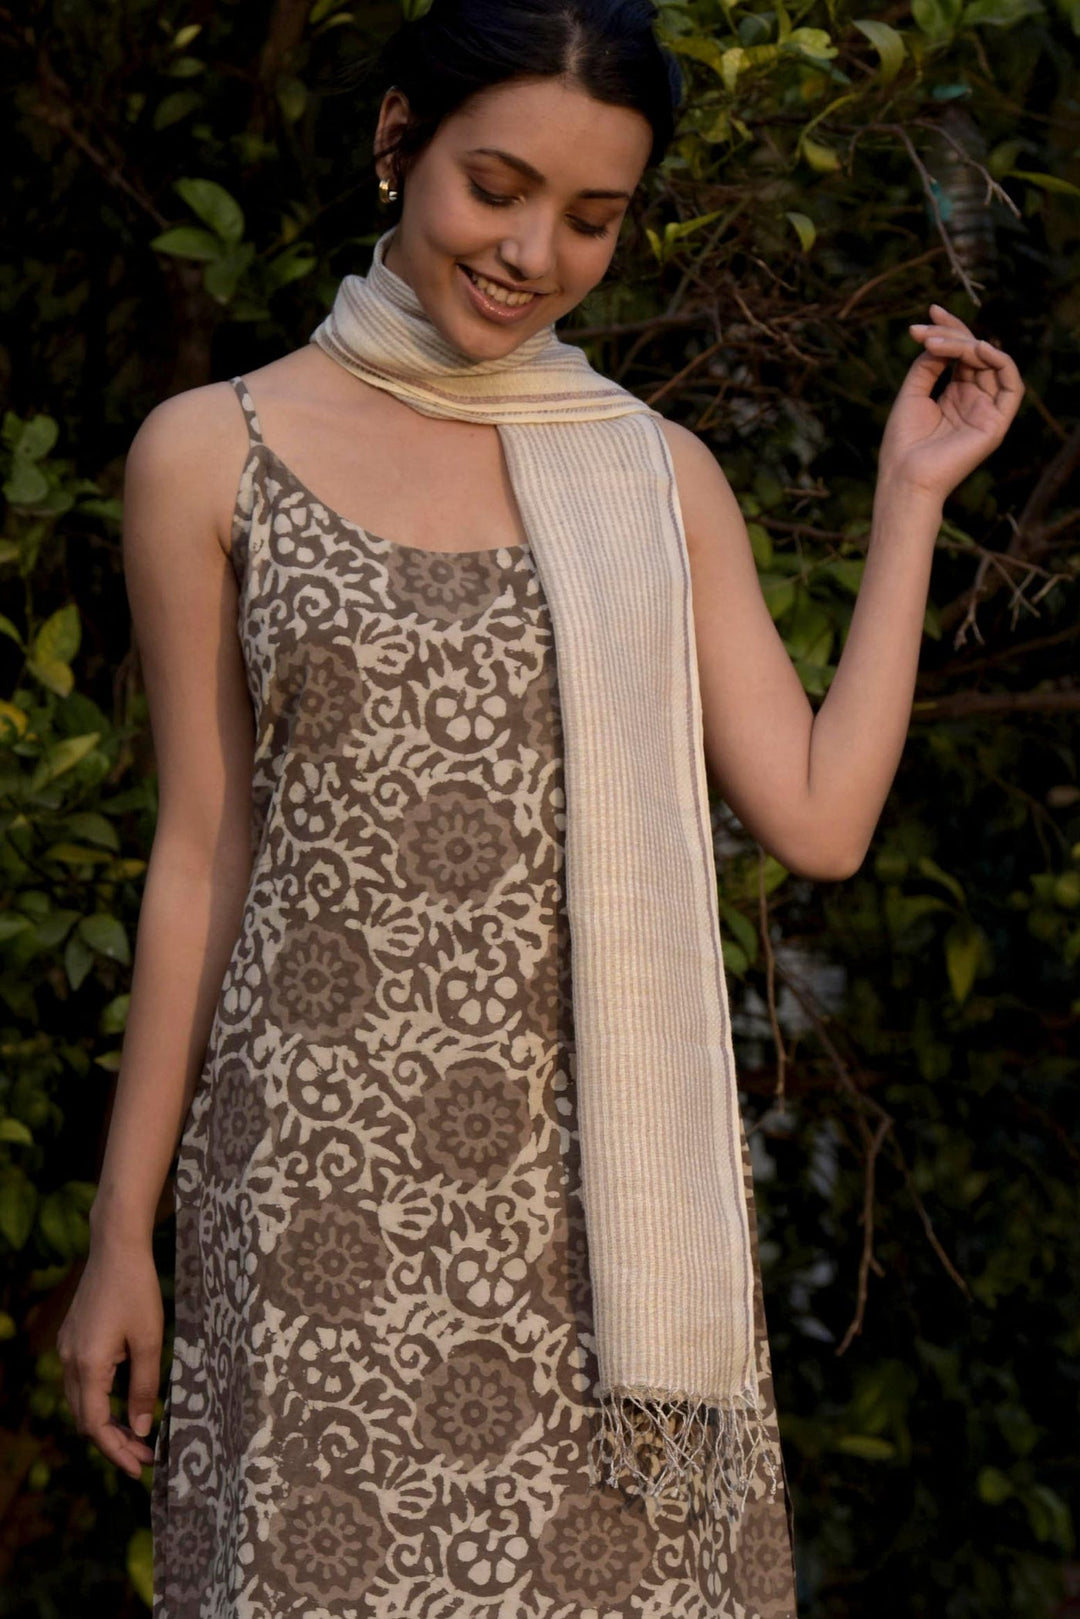 Floral Printed Sleeveless Dress with Stole | Floral Hand Printed Dress - Brown